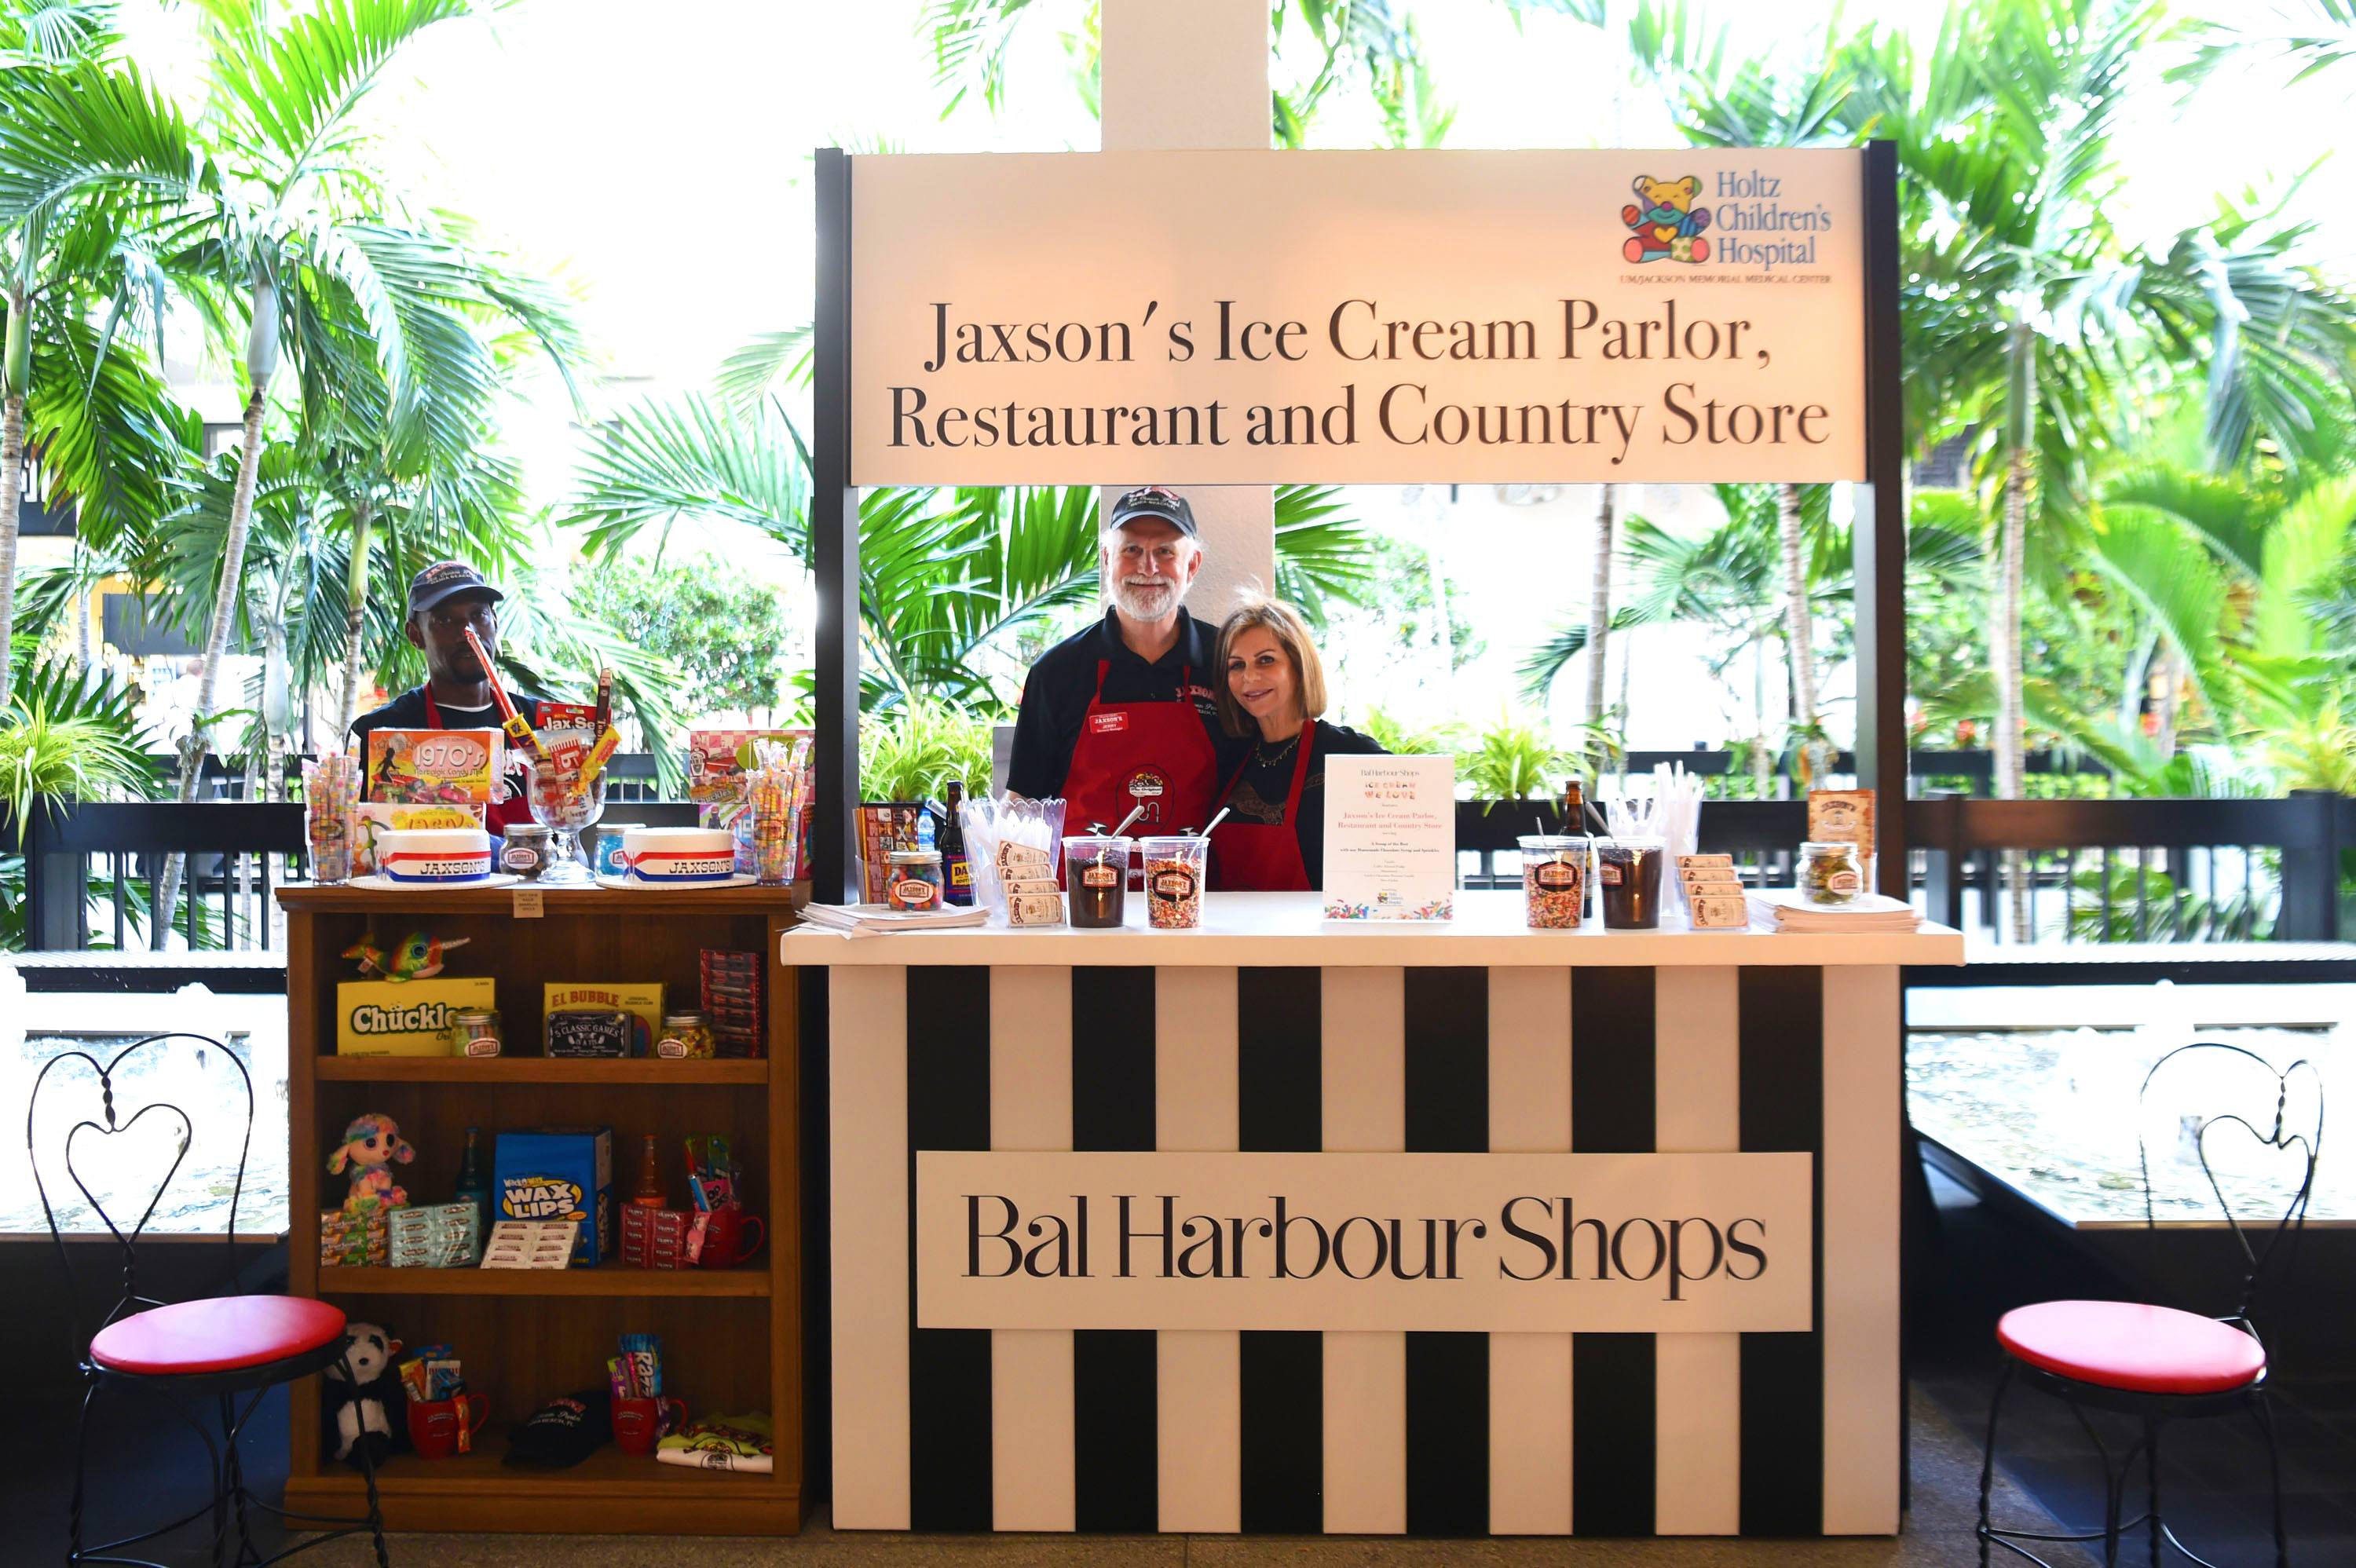 Jaxson's Ice Cream Parlor, Restaurant & Country Store served their signature scoop with homemade fudge and sprinkles